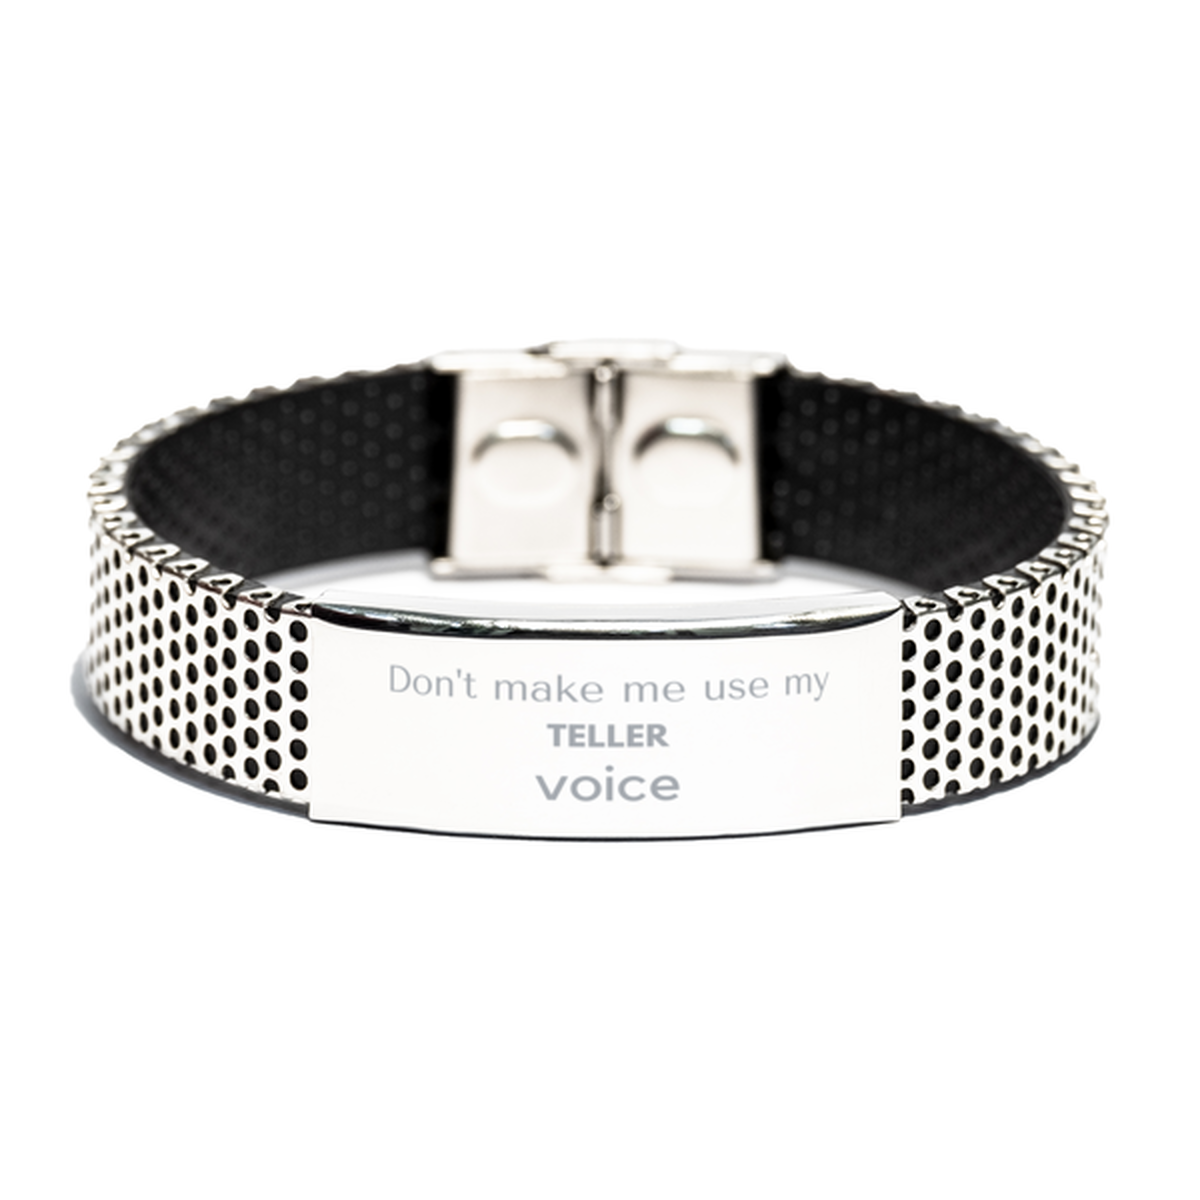 Don't make me use my Teller voice, Sarcasm Teller Gifts, Christmas Teller Stainless Steel Bracelet Birthday Unique Gifts For Teller Coworkers, Men, Women, Colleague, Friends